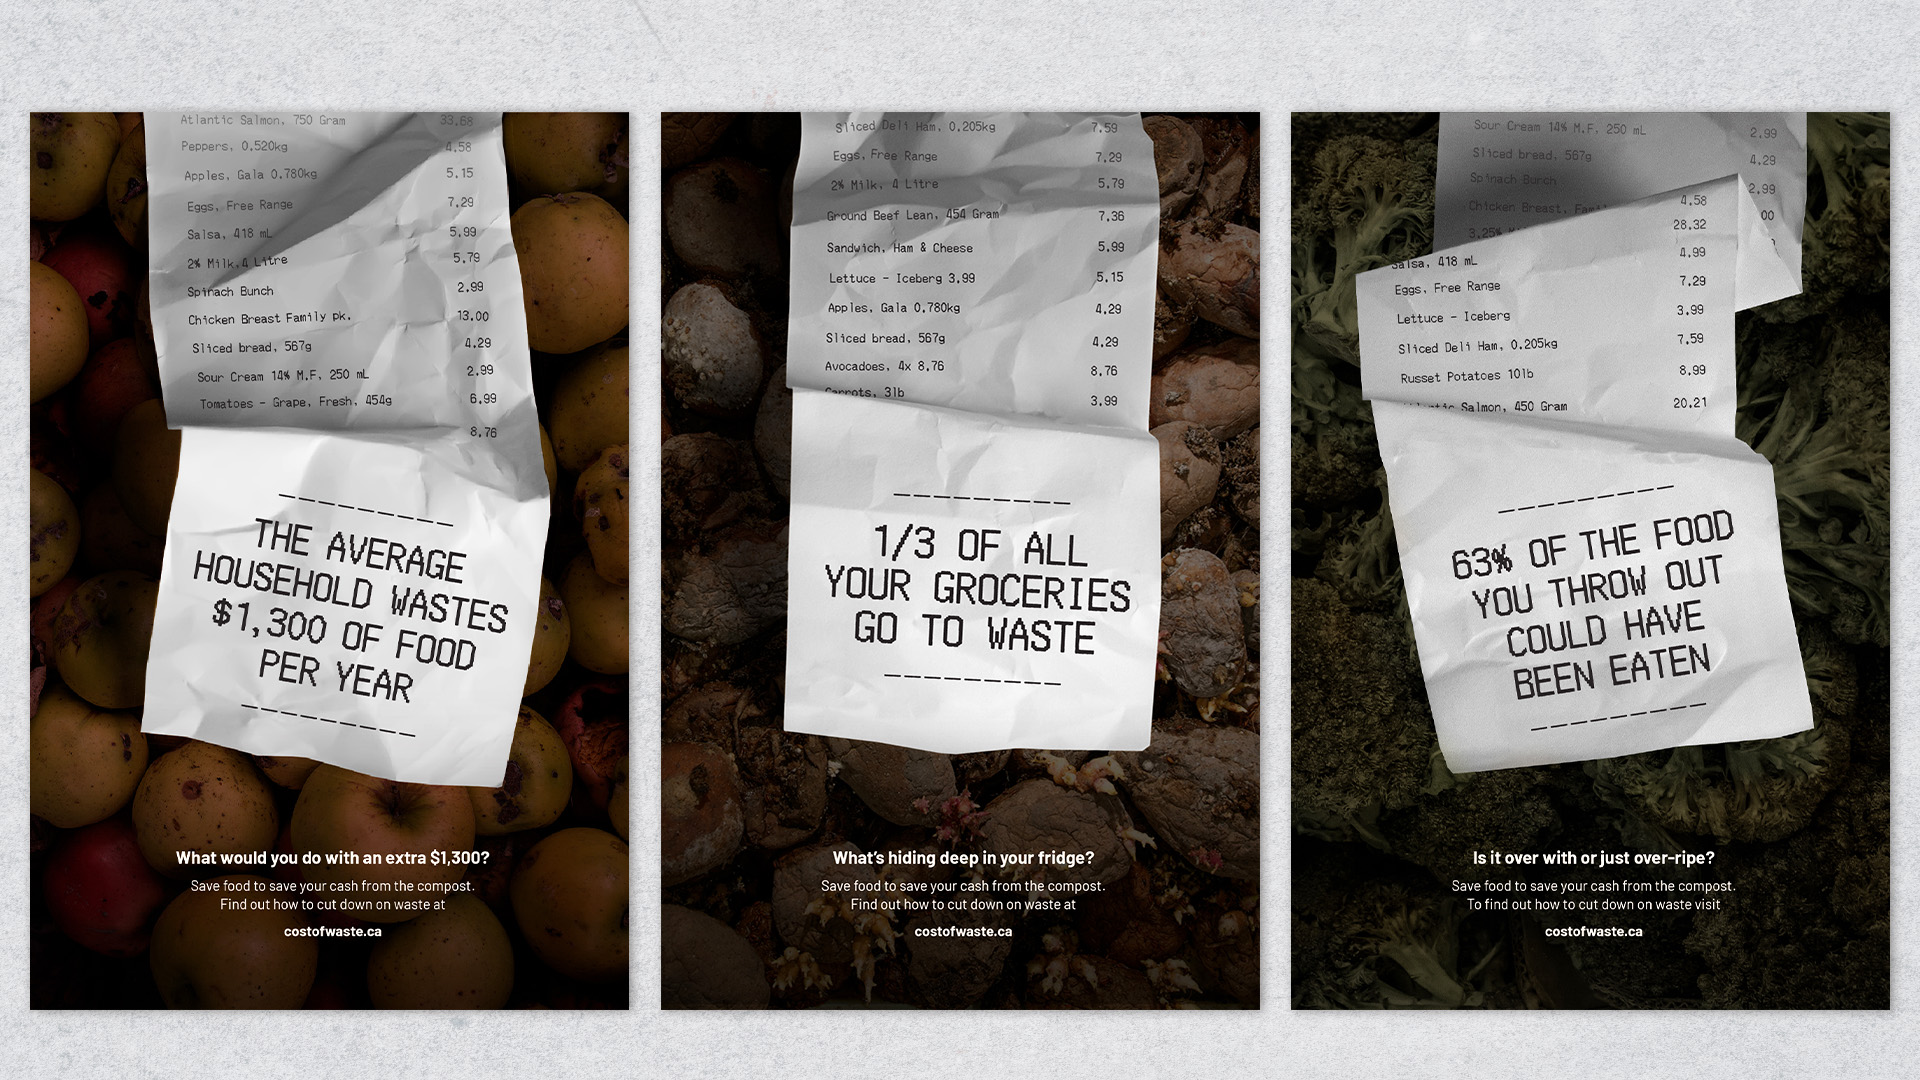 Three posters depicting receipts, each on dark backgrounds of produce images.